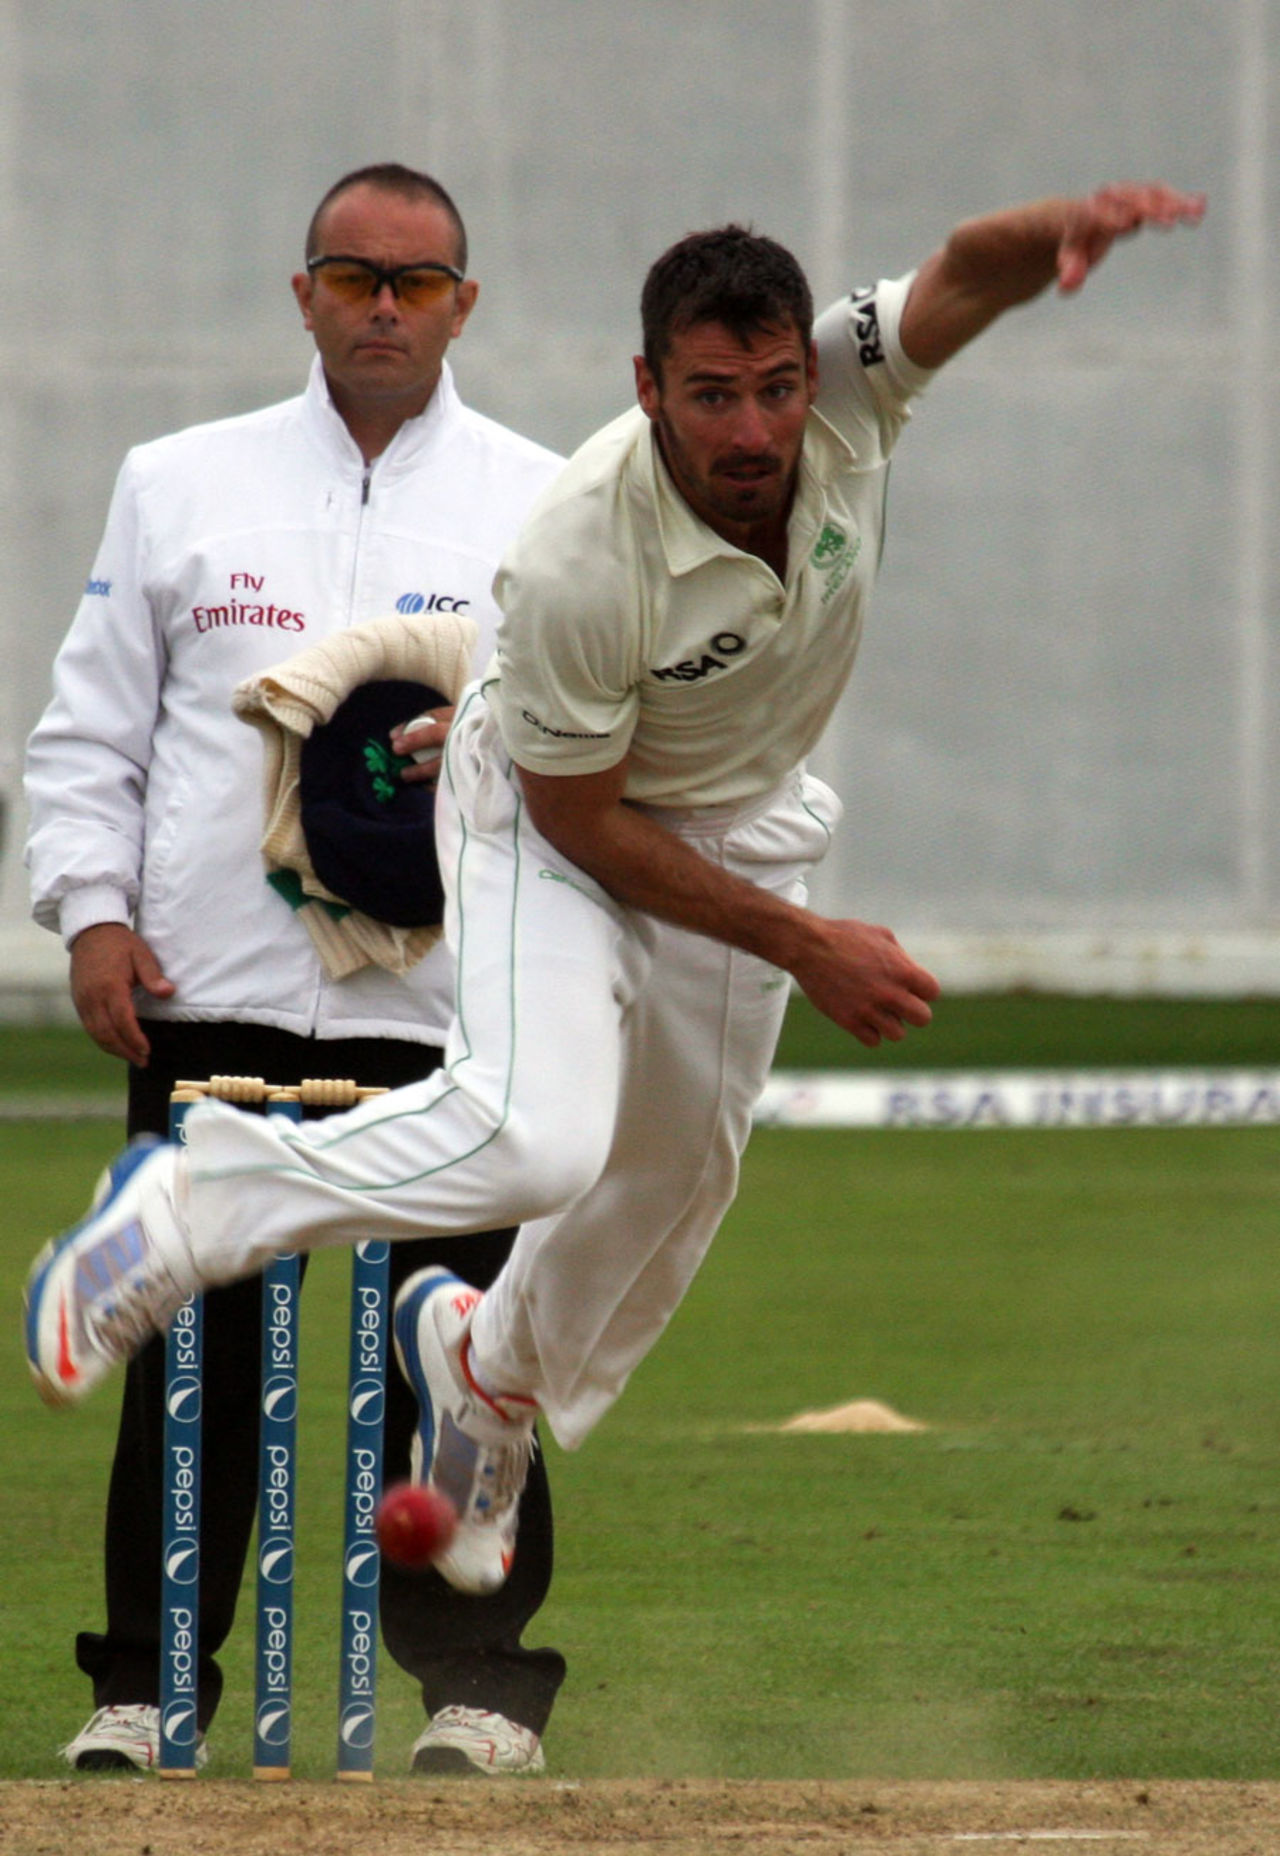 Max Sorensen in his delivery stride, Ireland v Scotland, ICC Intercontinental Cup, 3rd day, Dublin, September 13, 2013